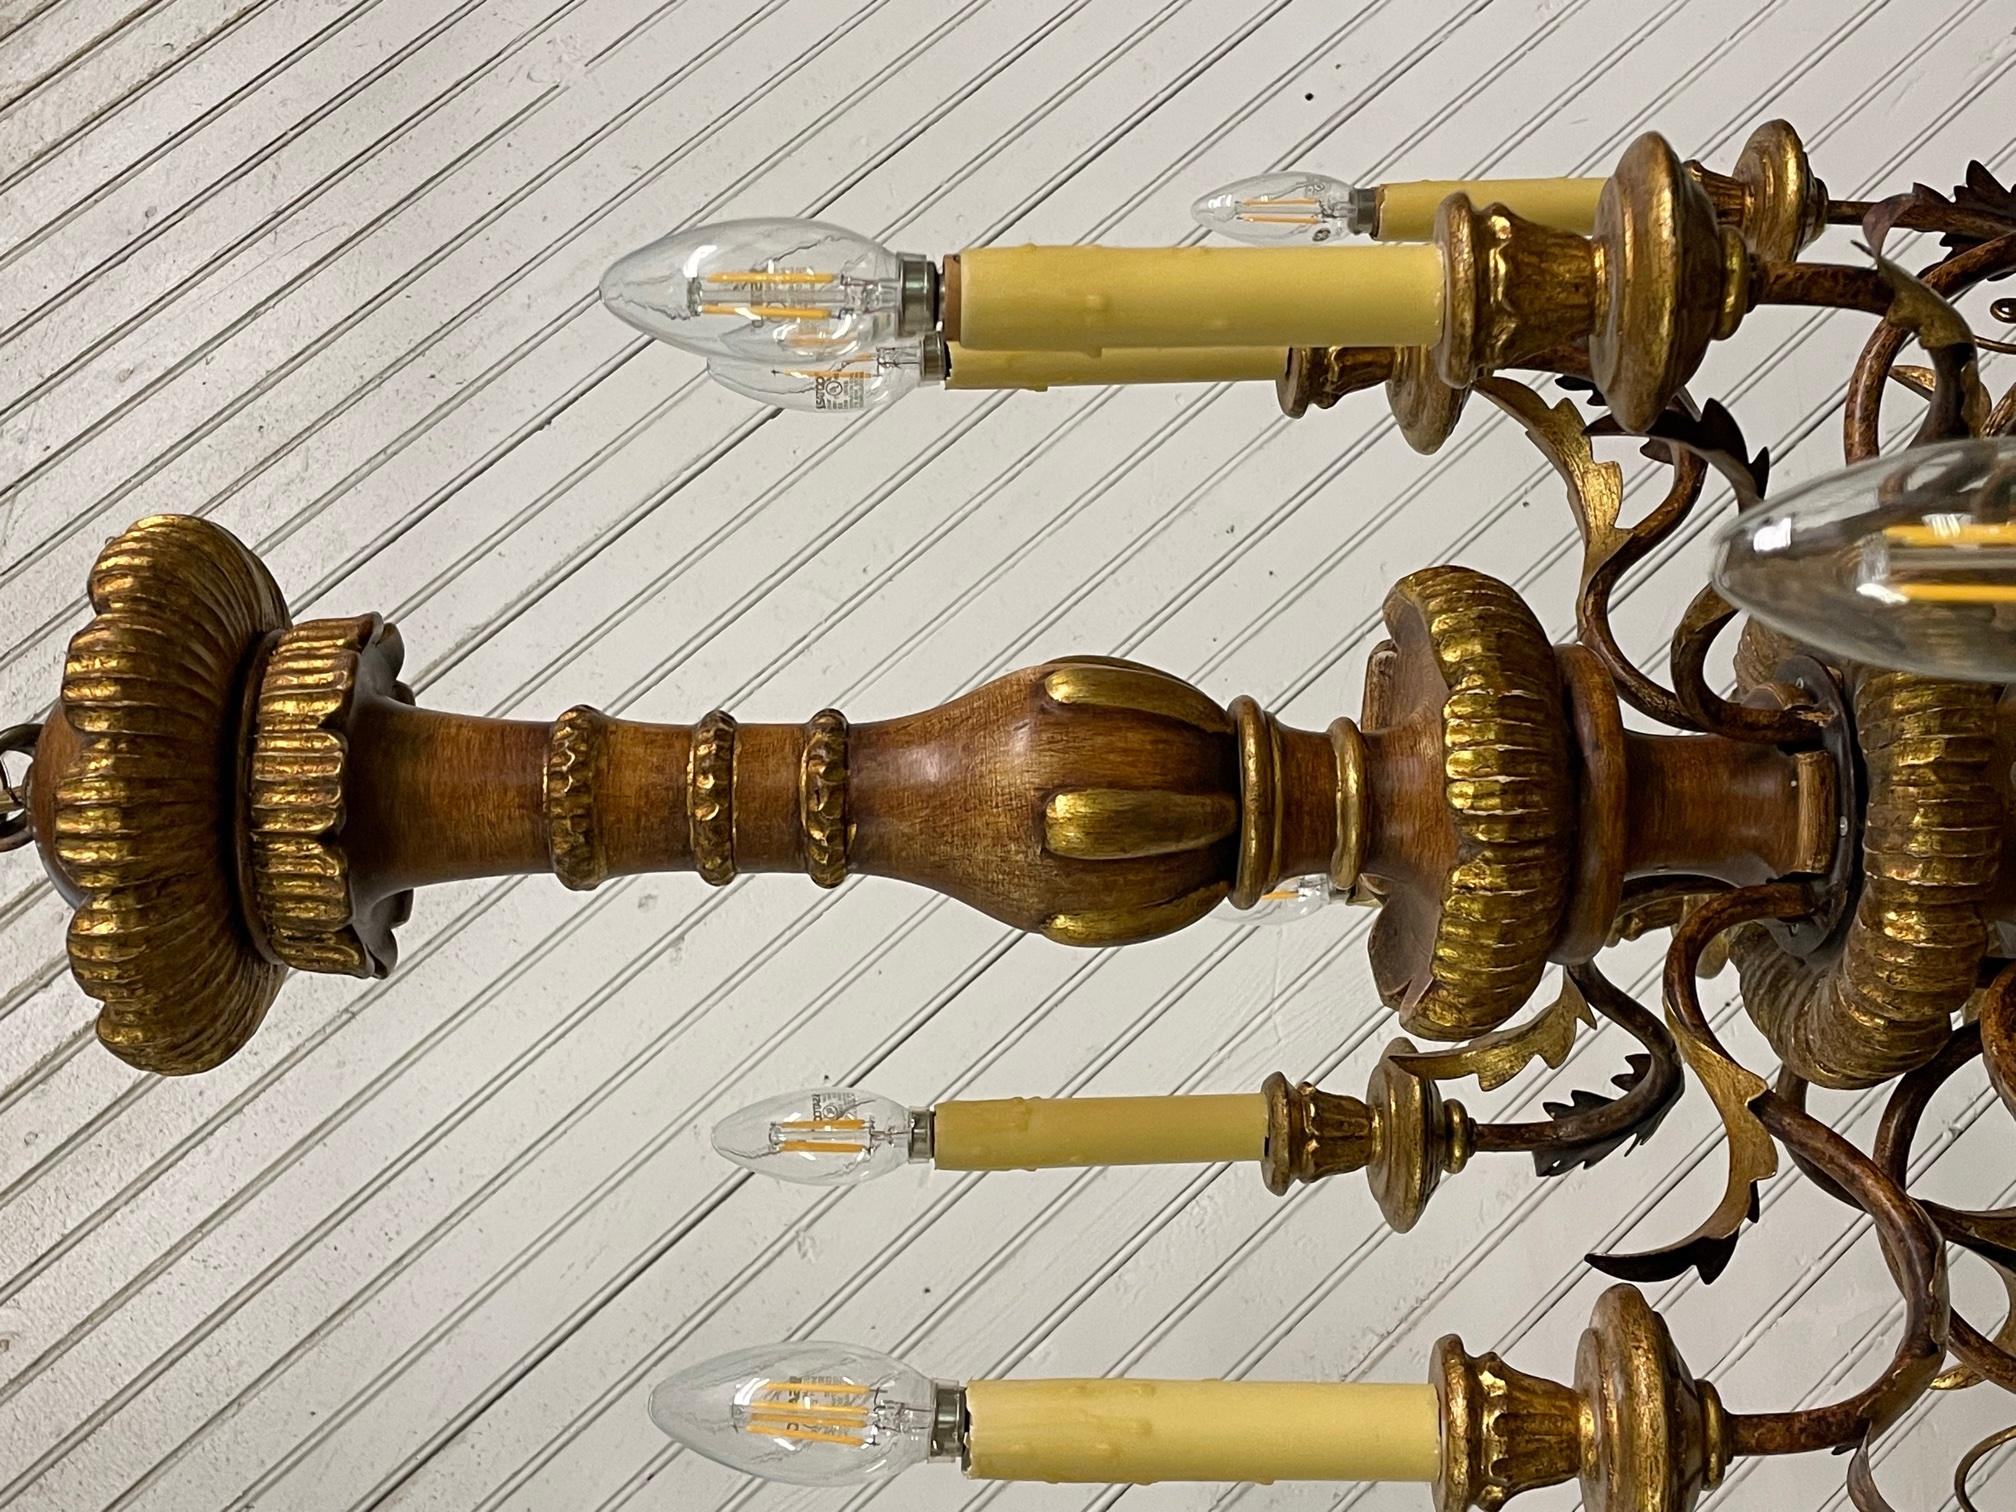 Large 12-arm chandelier features two levels of candle stye lights and tole metal accents. Good condition with minor imperfections consistent with age. Some candle sleeves show cracks along top edge.
**Please note: We offer shipping direct from our